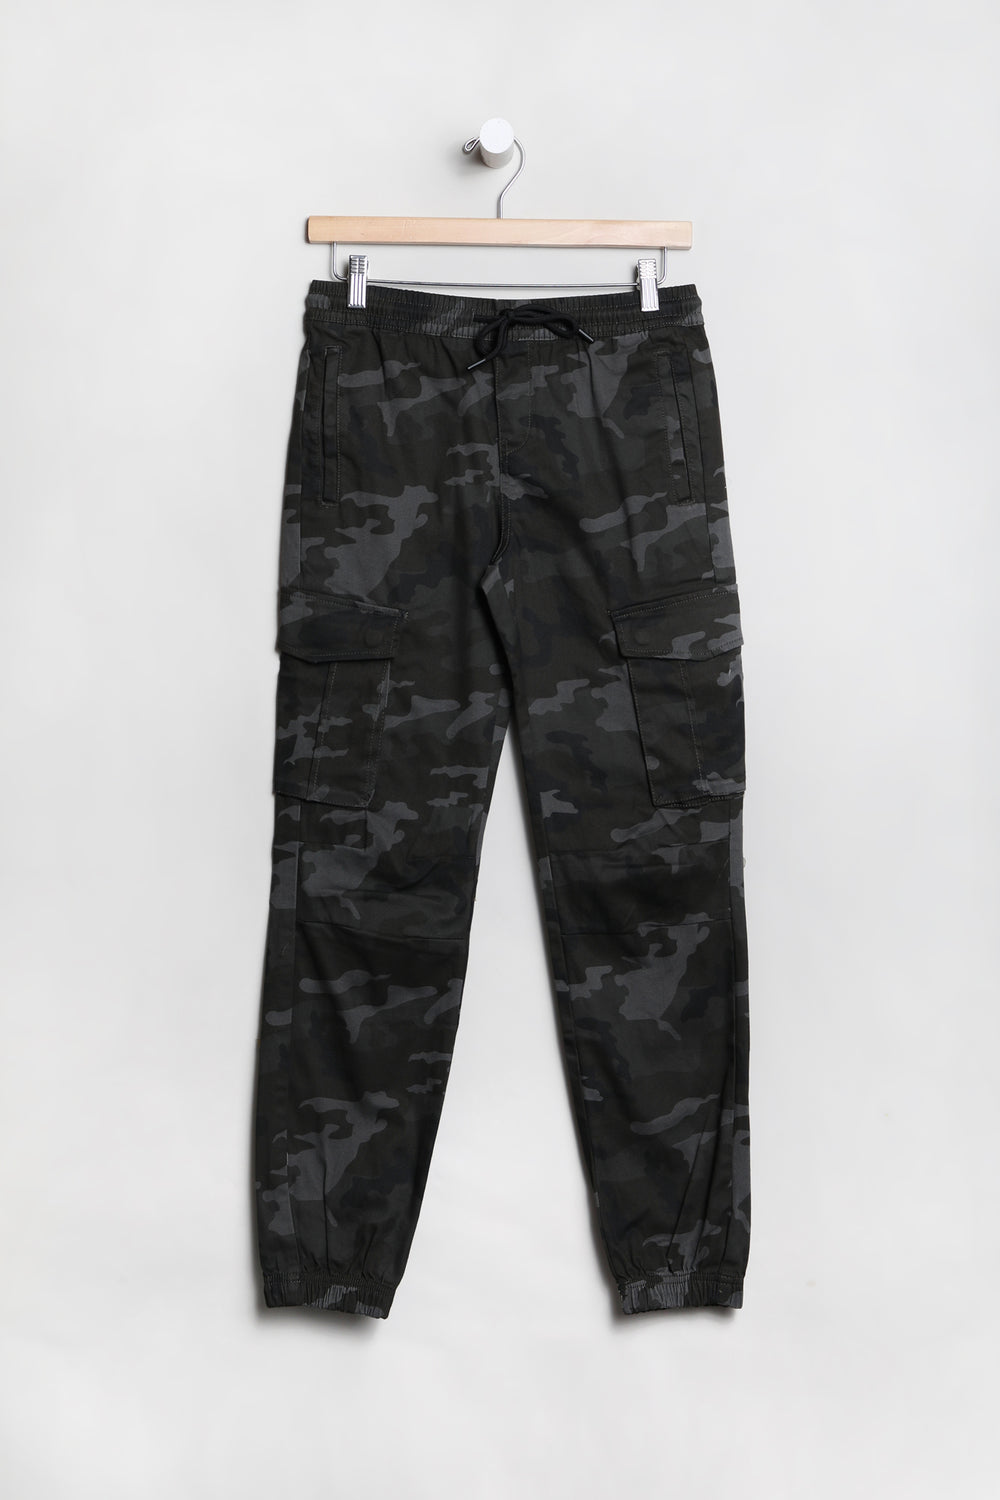 West49 Youth Camo Twill Cargo Jogger West49 Youth Camo Twill Cargo Jogger